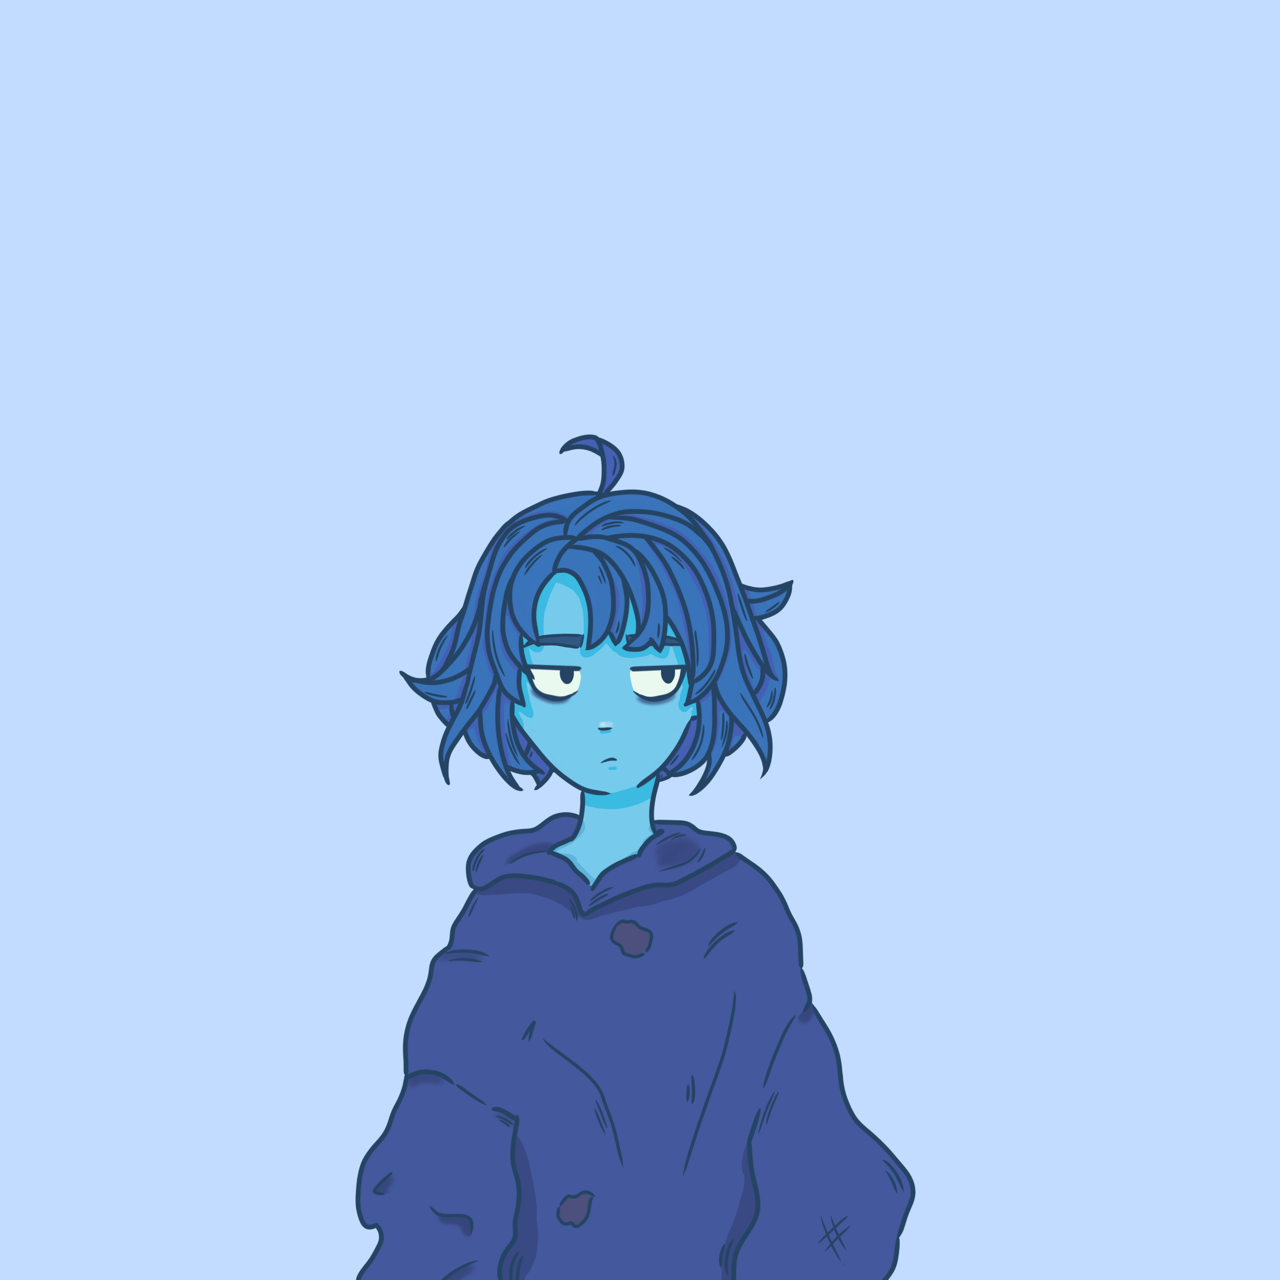 Grumpy Lapis Lazuli, wearing a hoodie because why the fuck not. (It was actually not supposed to be Lapis but when I finished the lineart I was like “heh, this could do a cool Lapis” and colored it as...